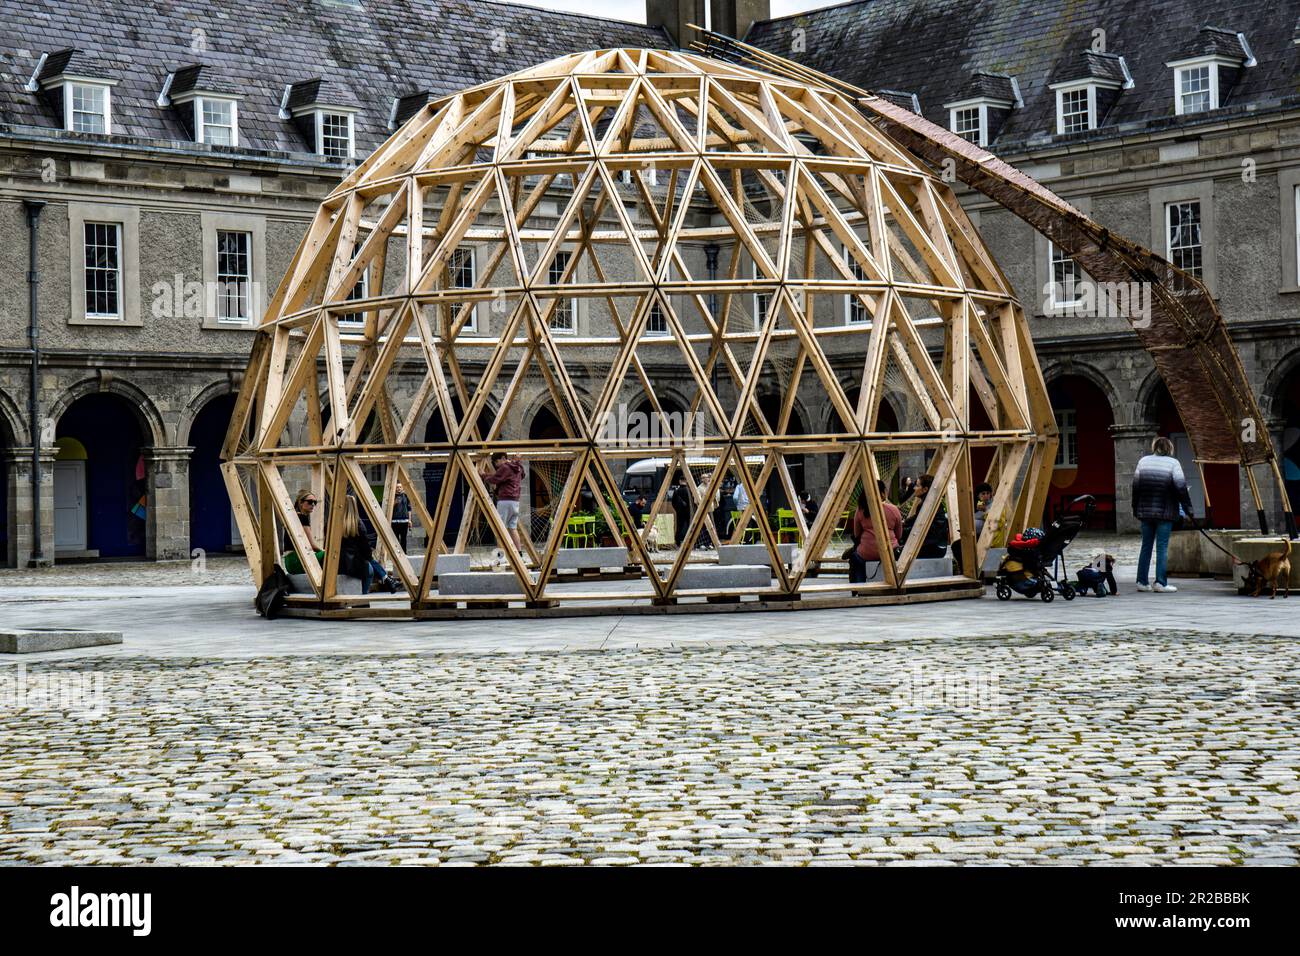 Éirigh,The Urban Eco Pavilion, designed by Reddy Architects and Urbanism, in The Royal Hospital Kilmainham, Dublin.A sustainable wooden construction Stock Photo